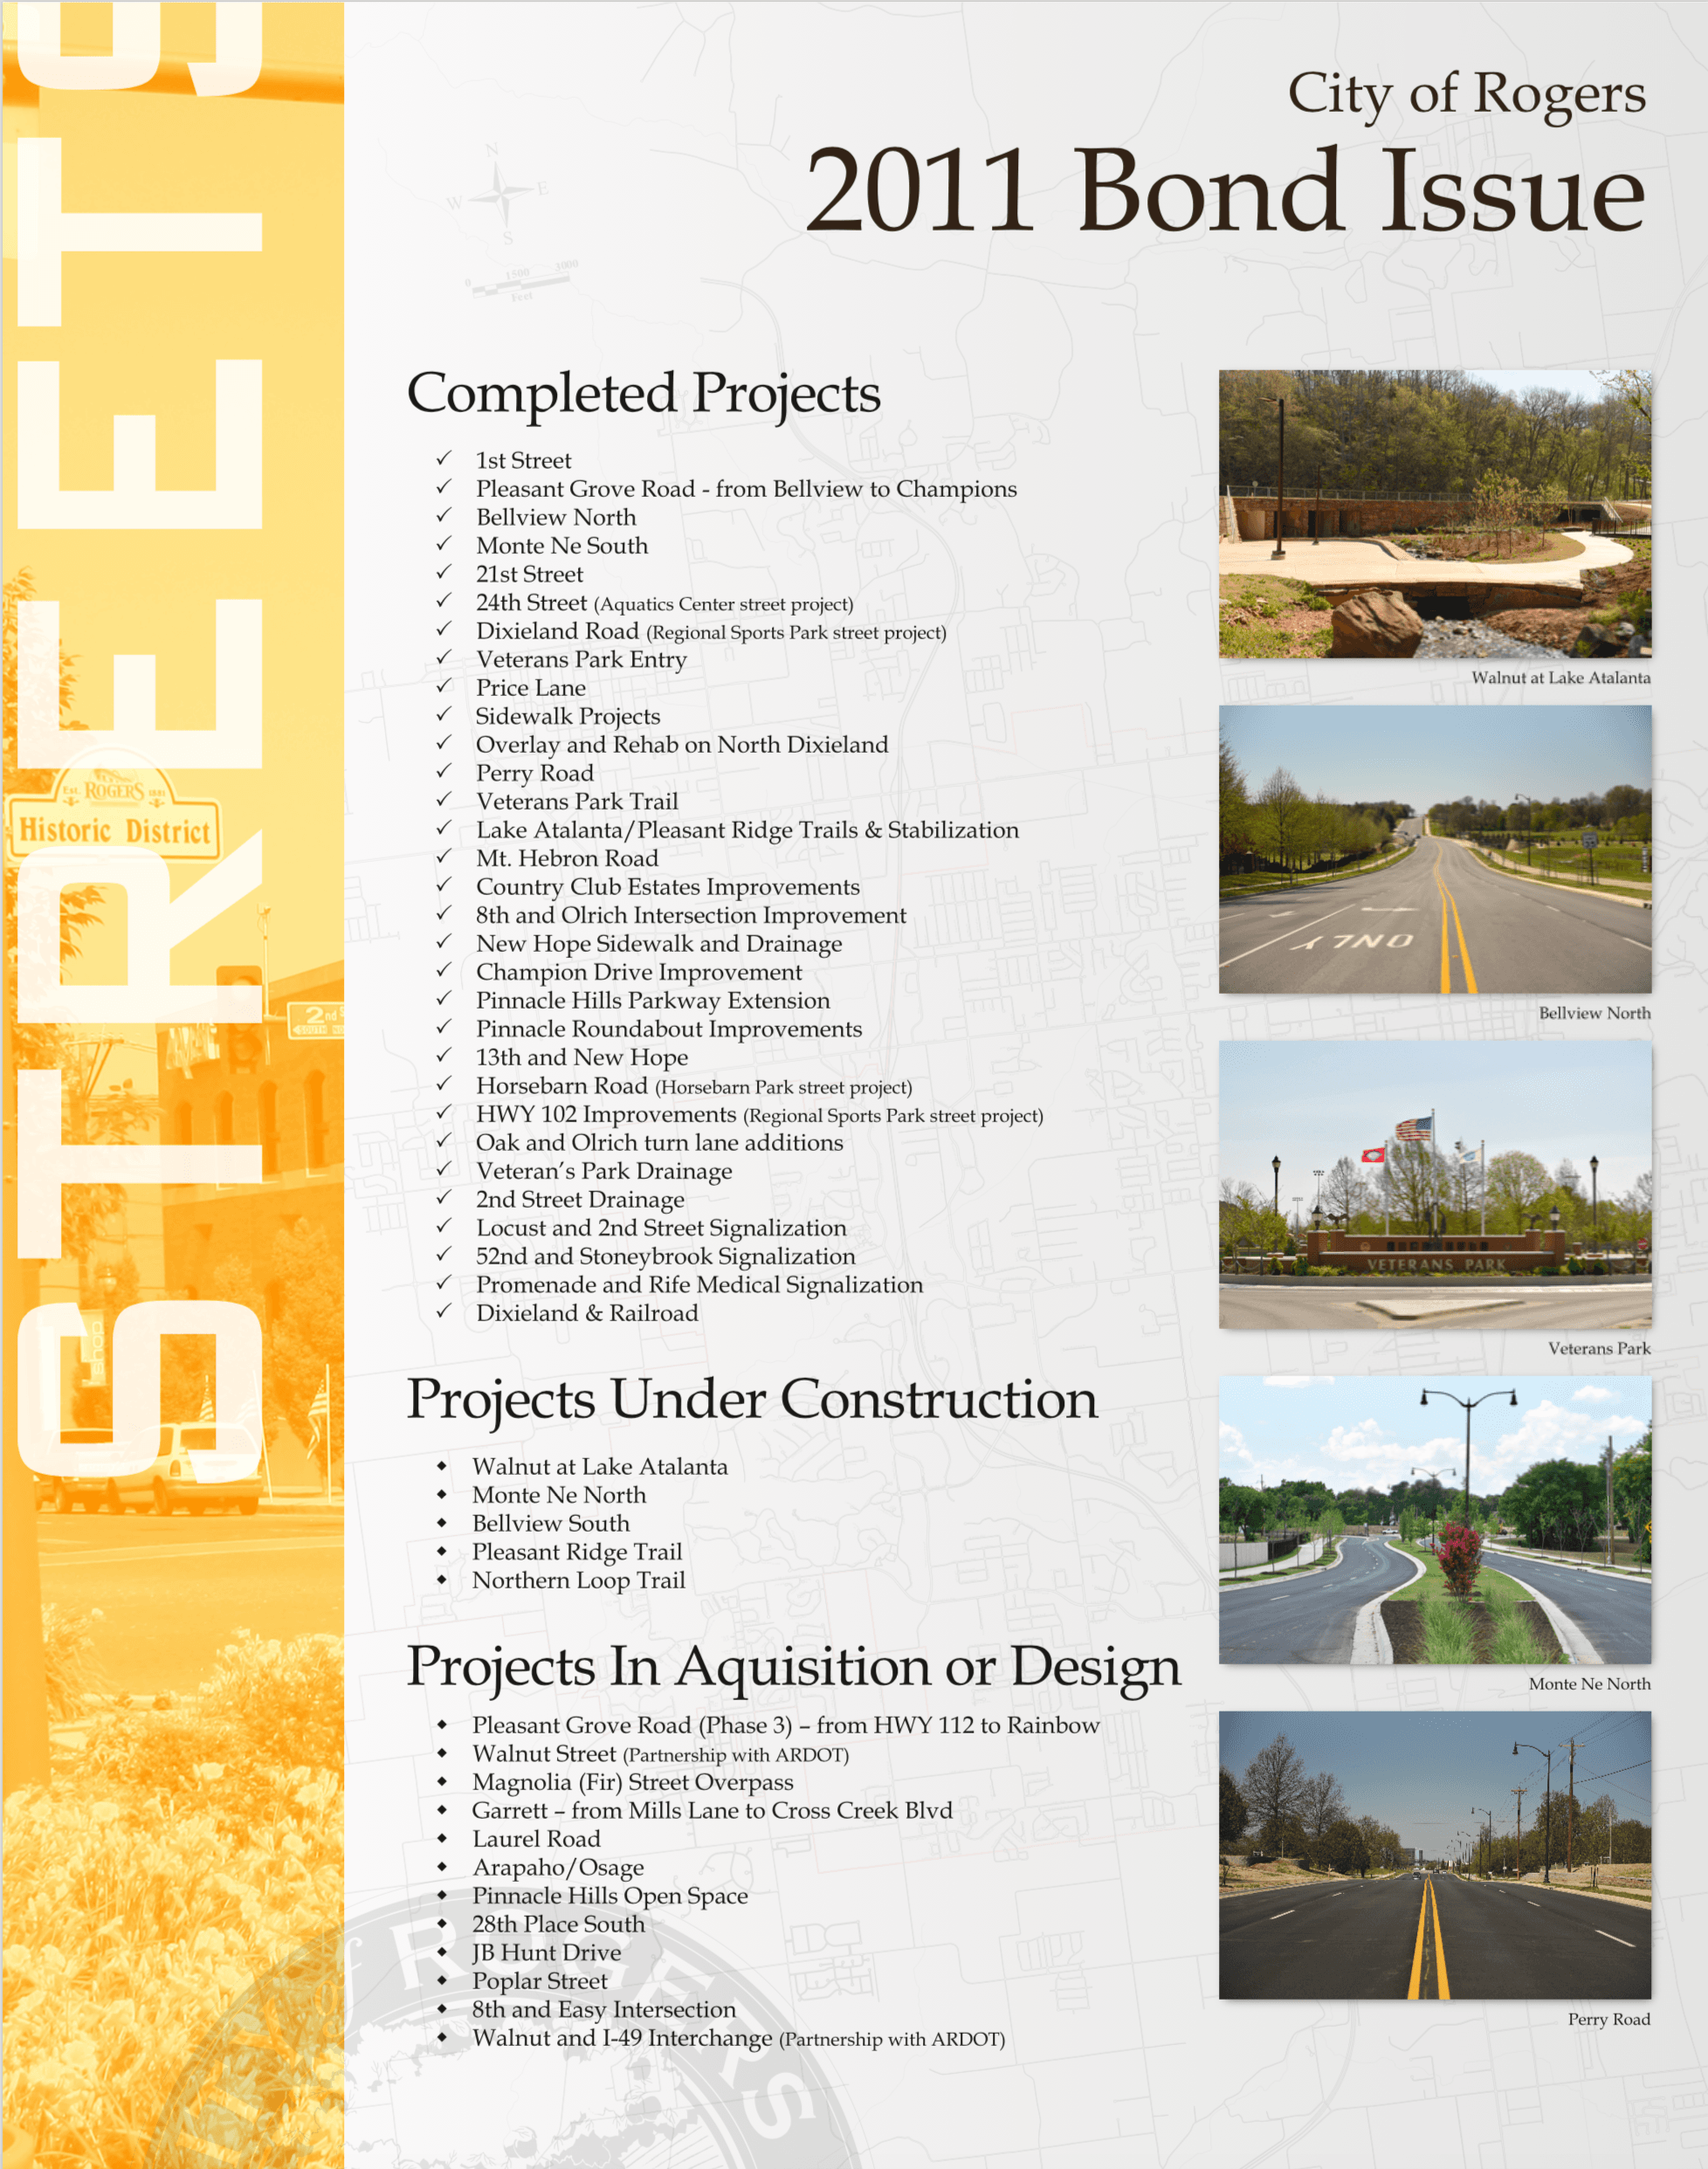 Completed Street Projects from 2011 Bond 